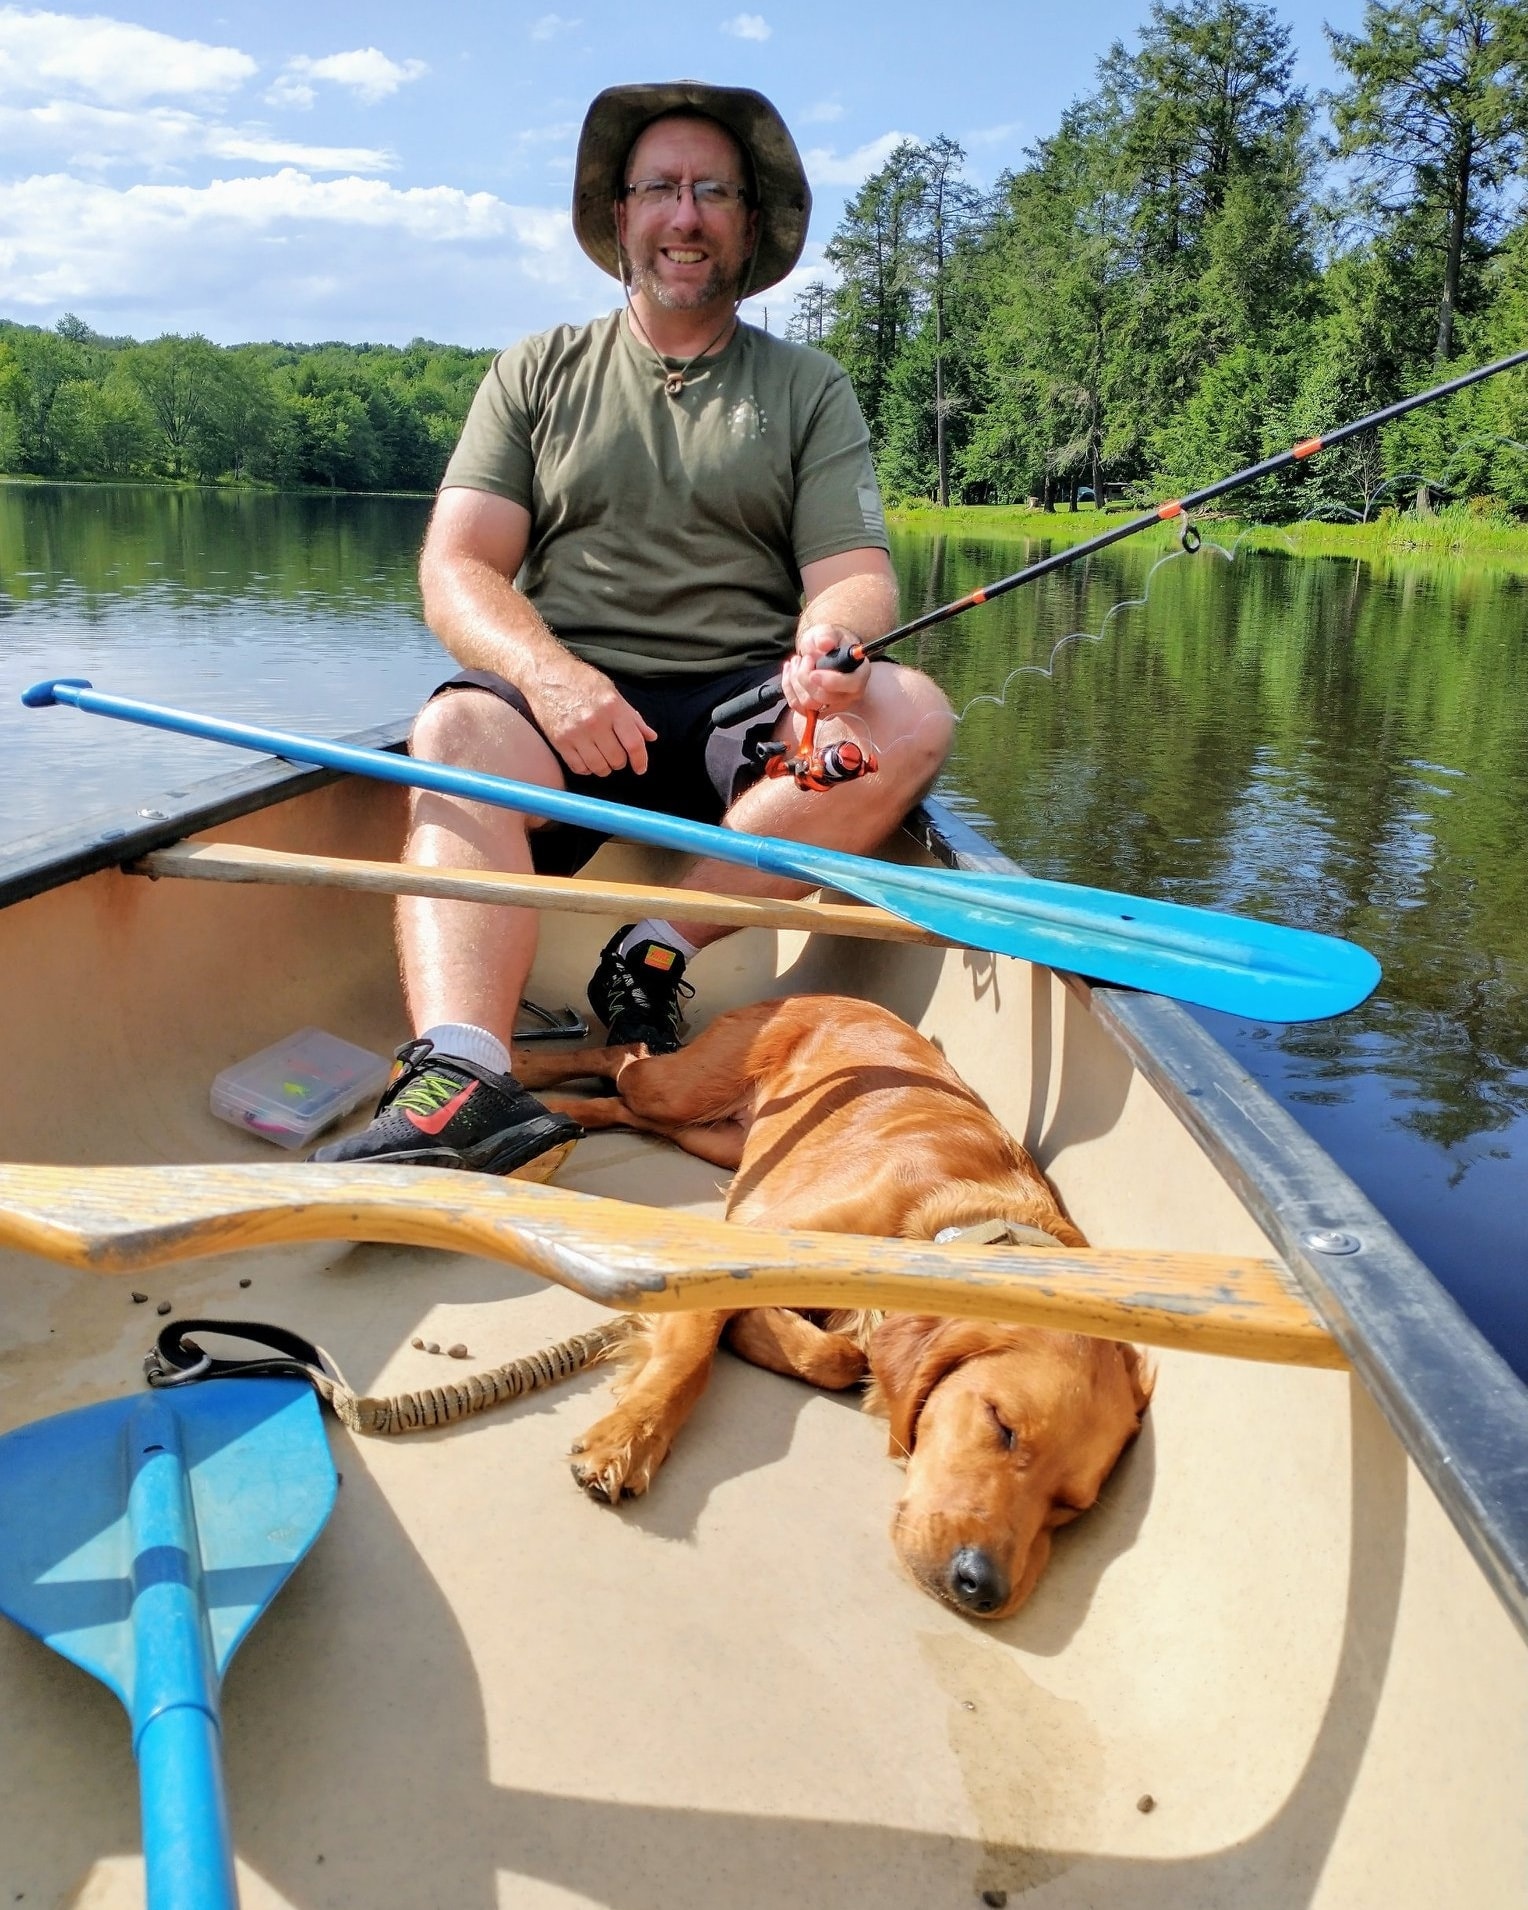 stand with me handler and dog in rowboat on lake